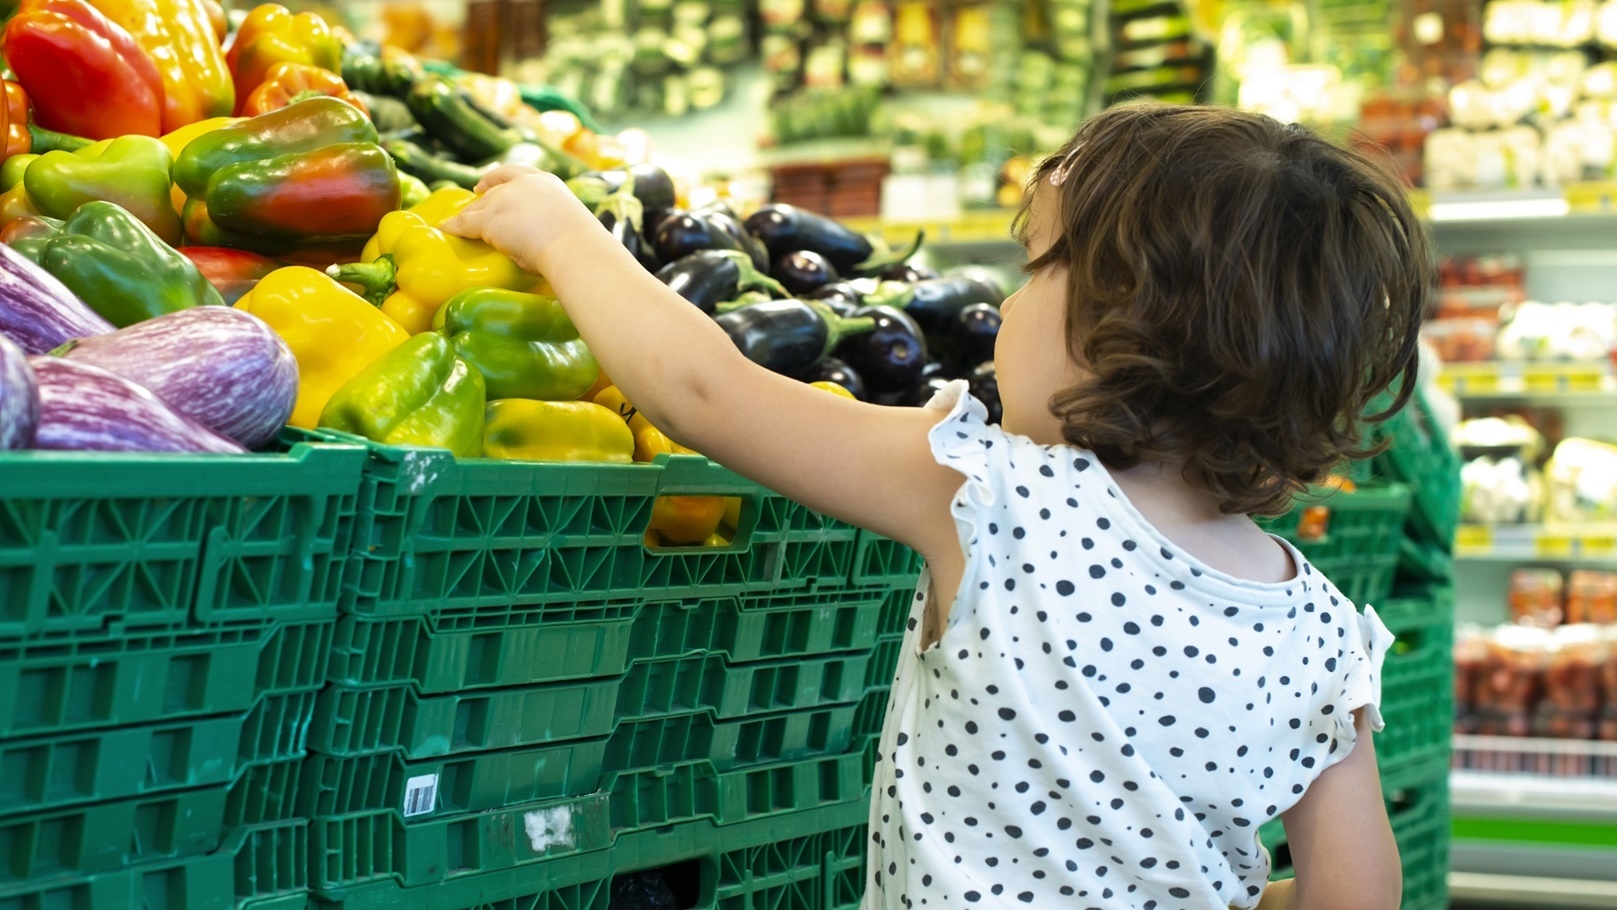 child-shopping-peppers-in-supermarket-concept-for-2021-09-01-22-37-55-utc